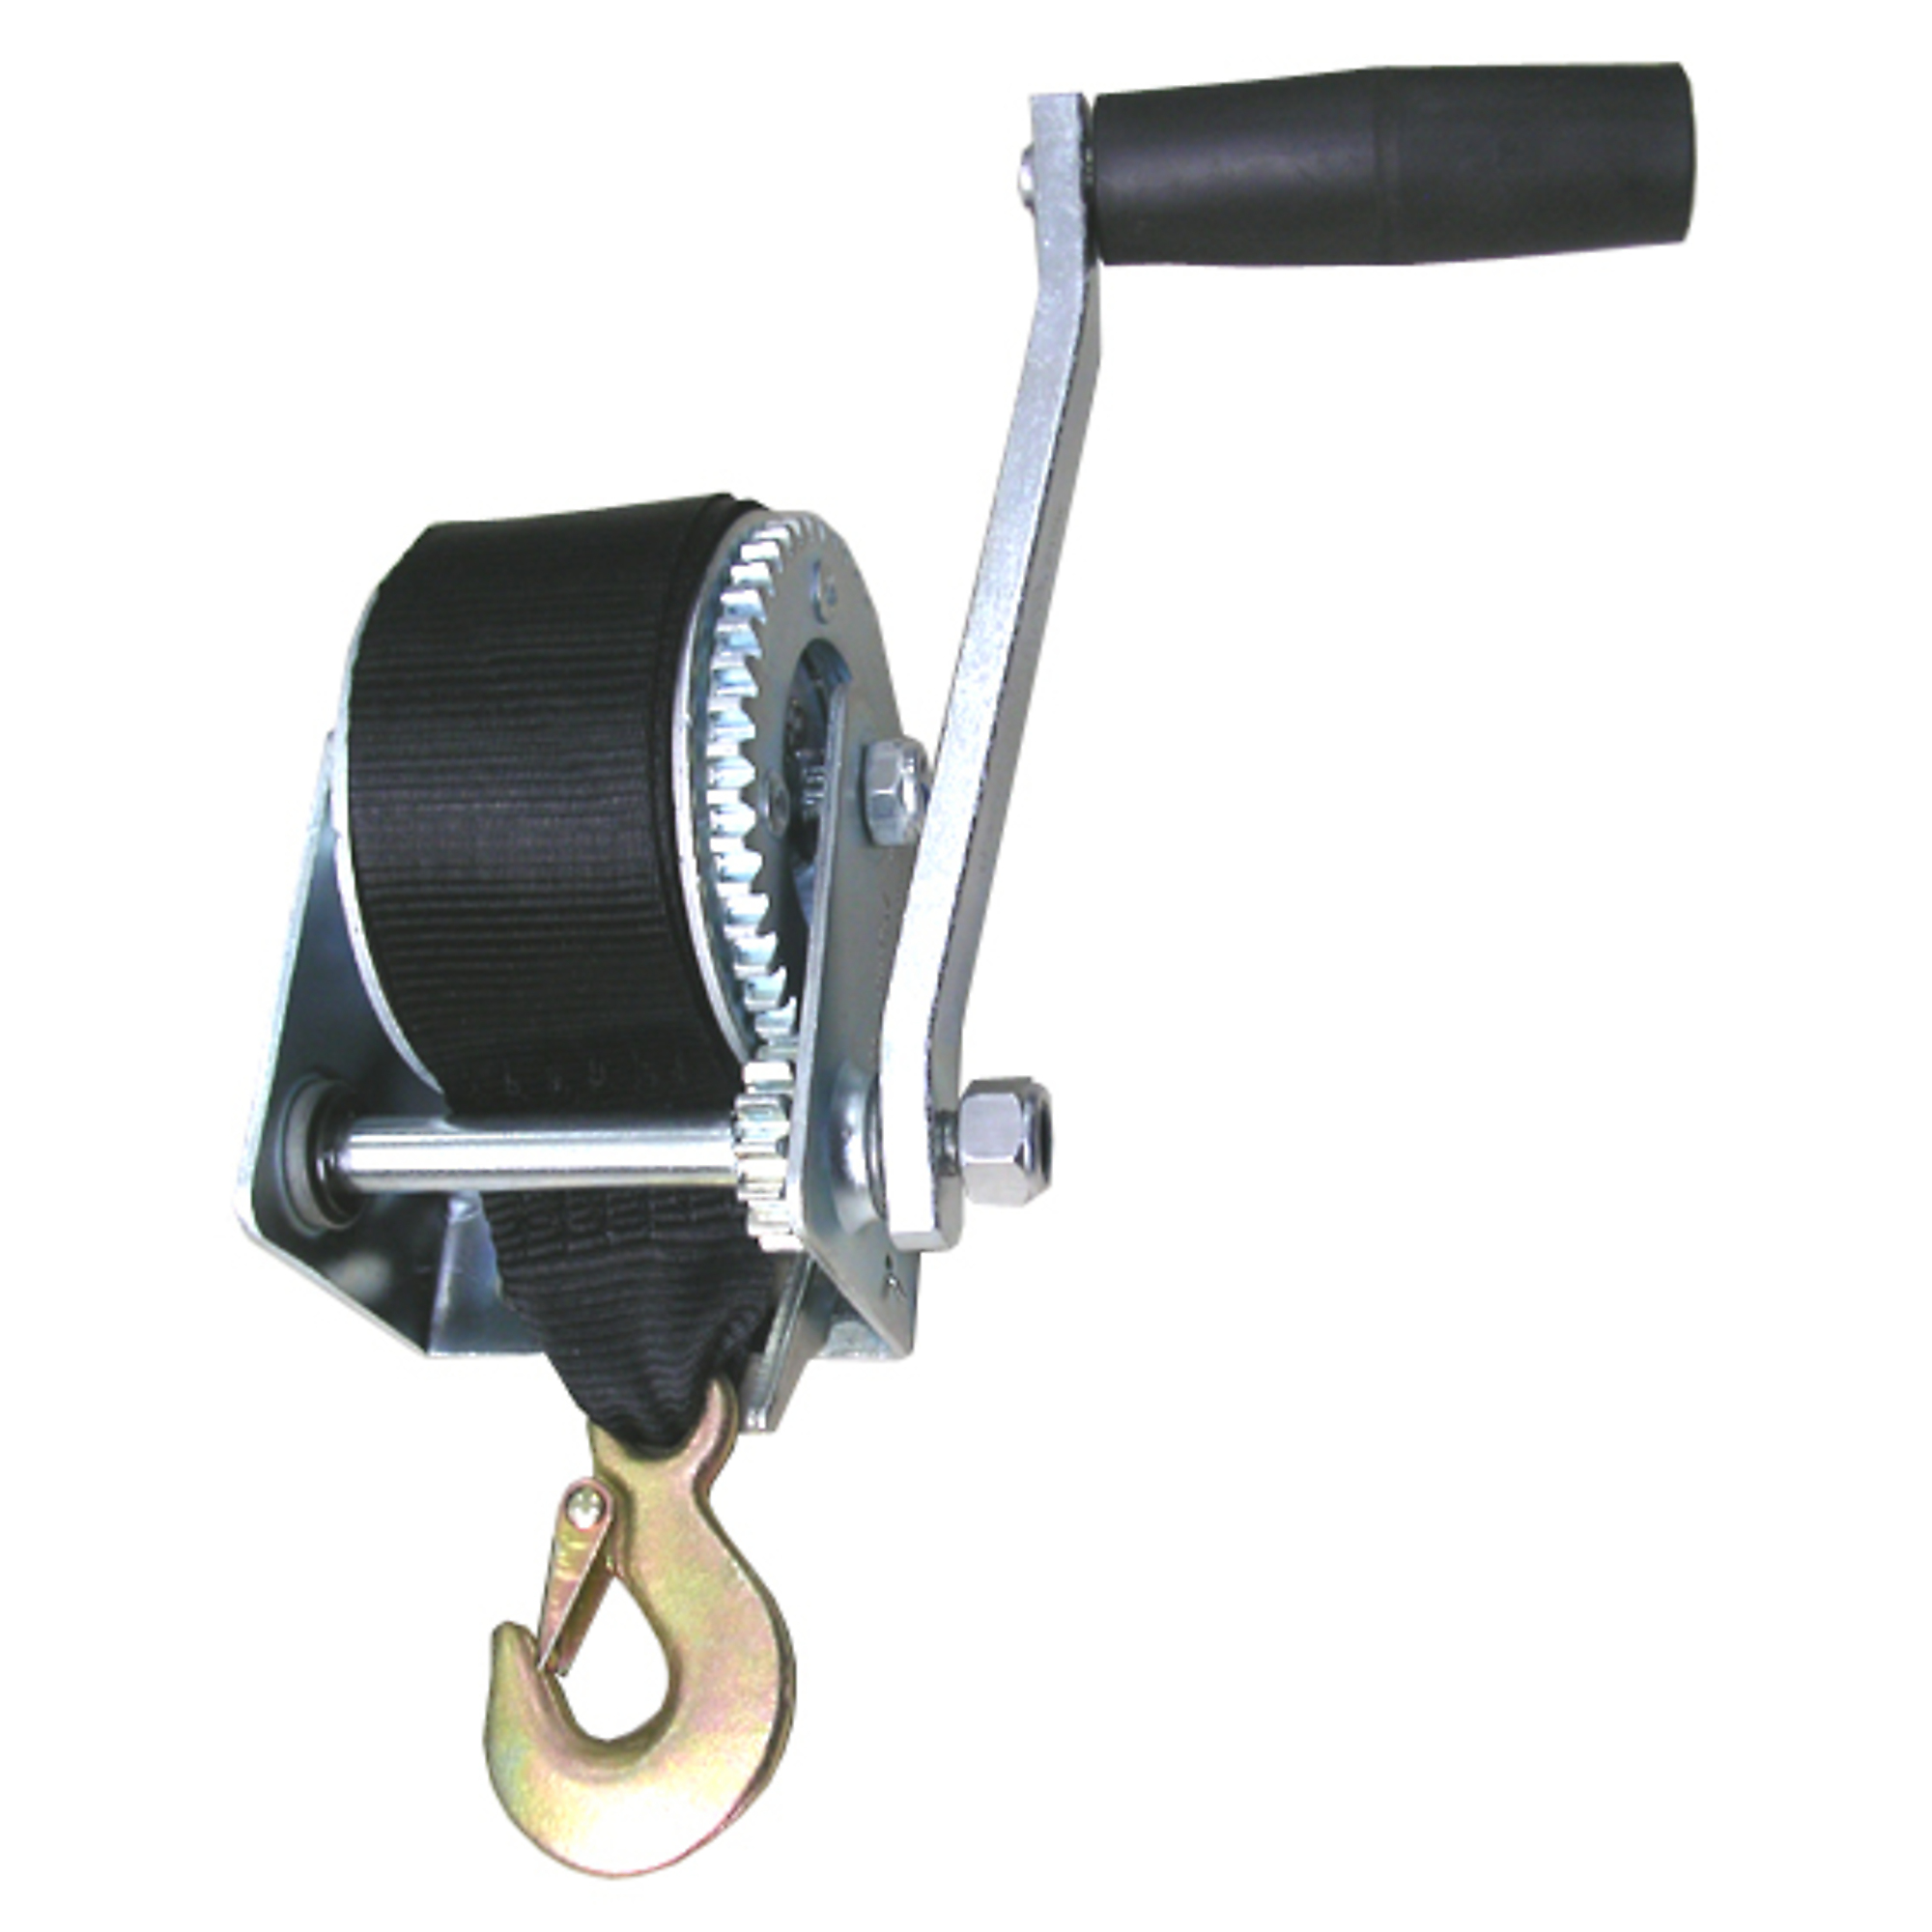 American Power Pull, 600 lbs Hand Winch, Model AG226